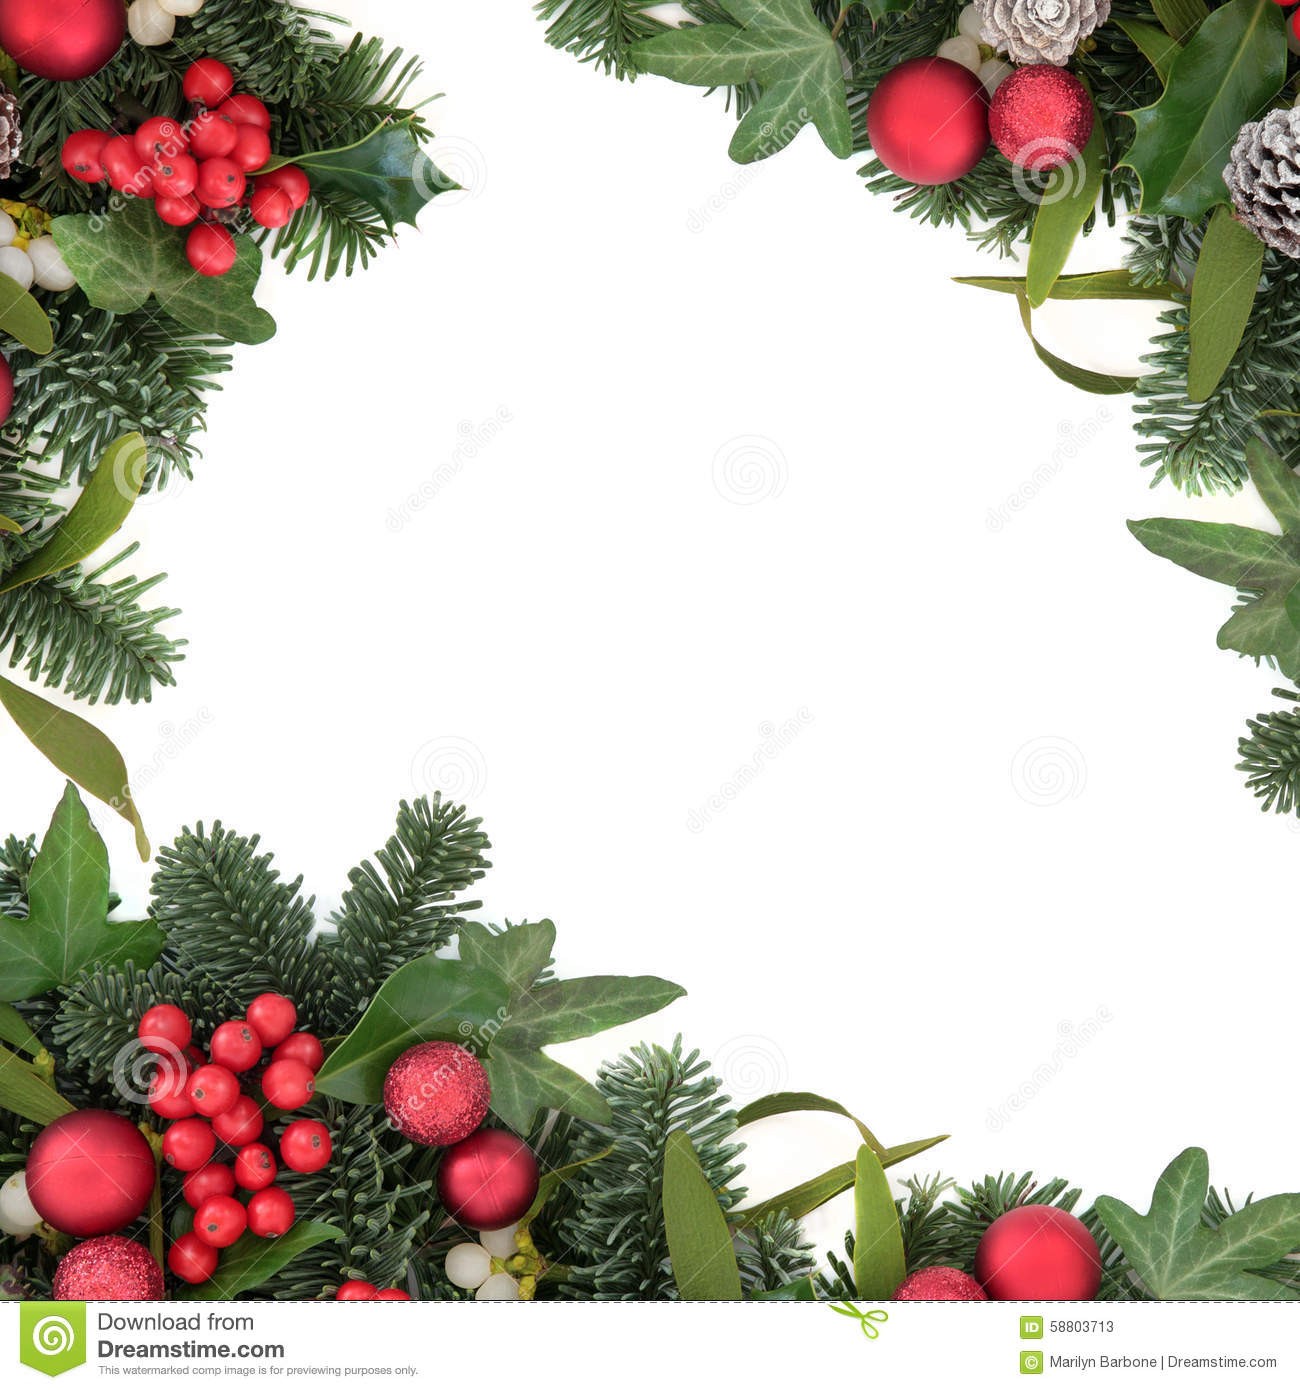 Holly And Red Bauble Border Stock Image Of Background Card Christmas Ivy